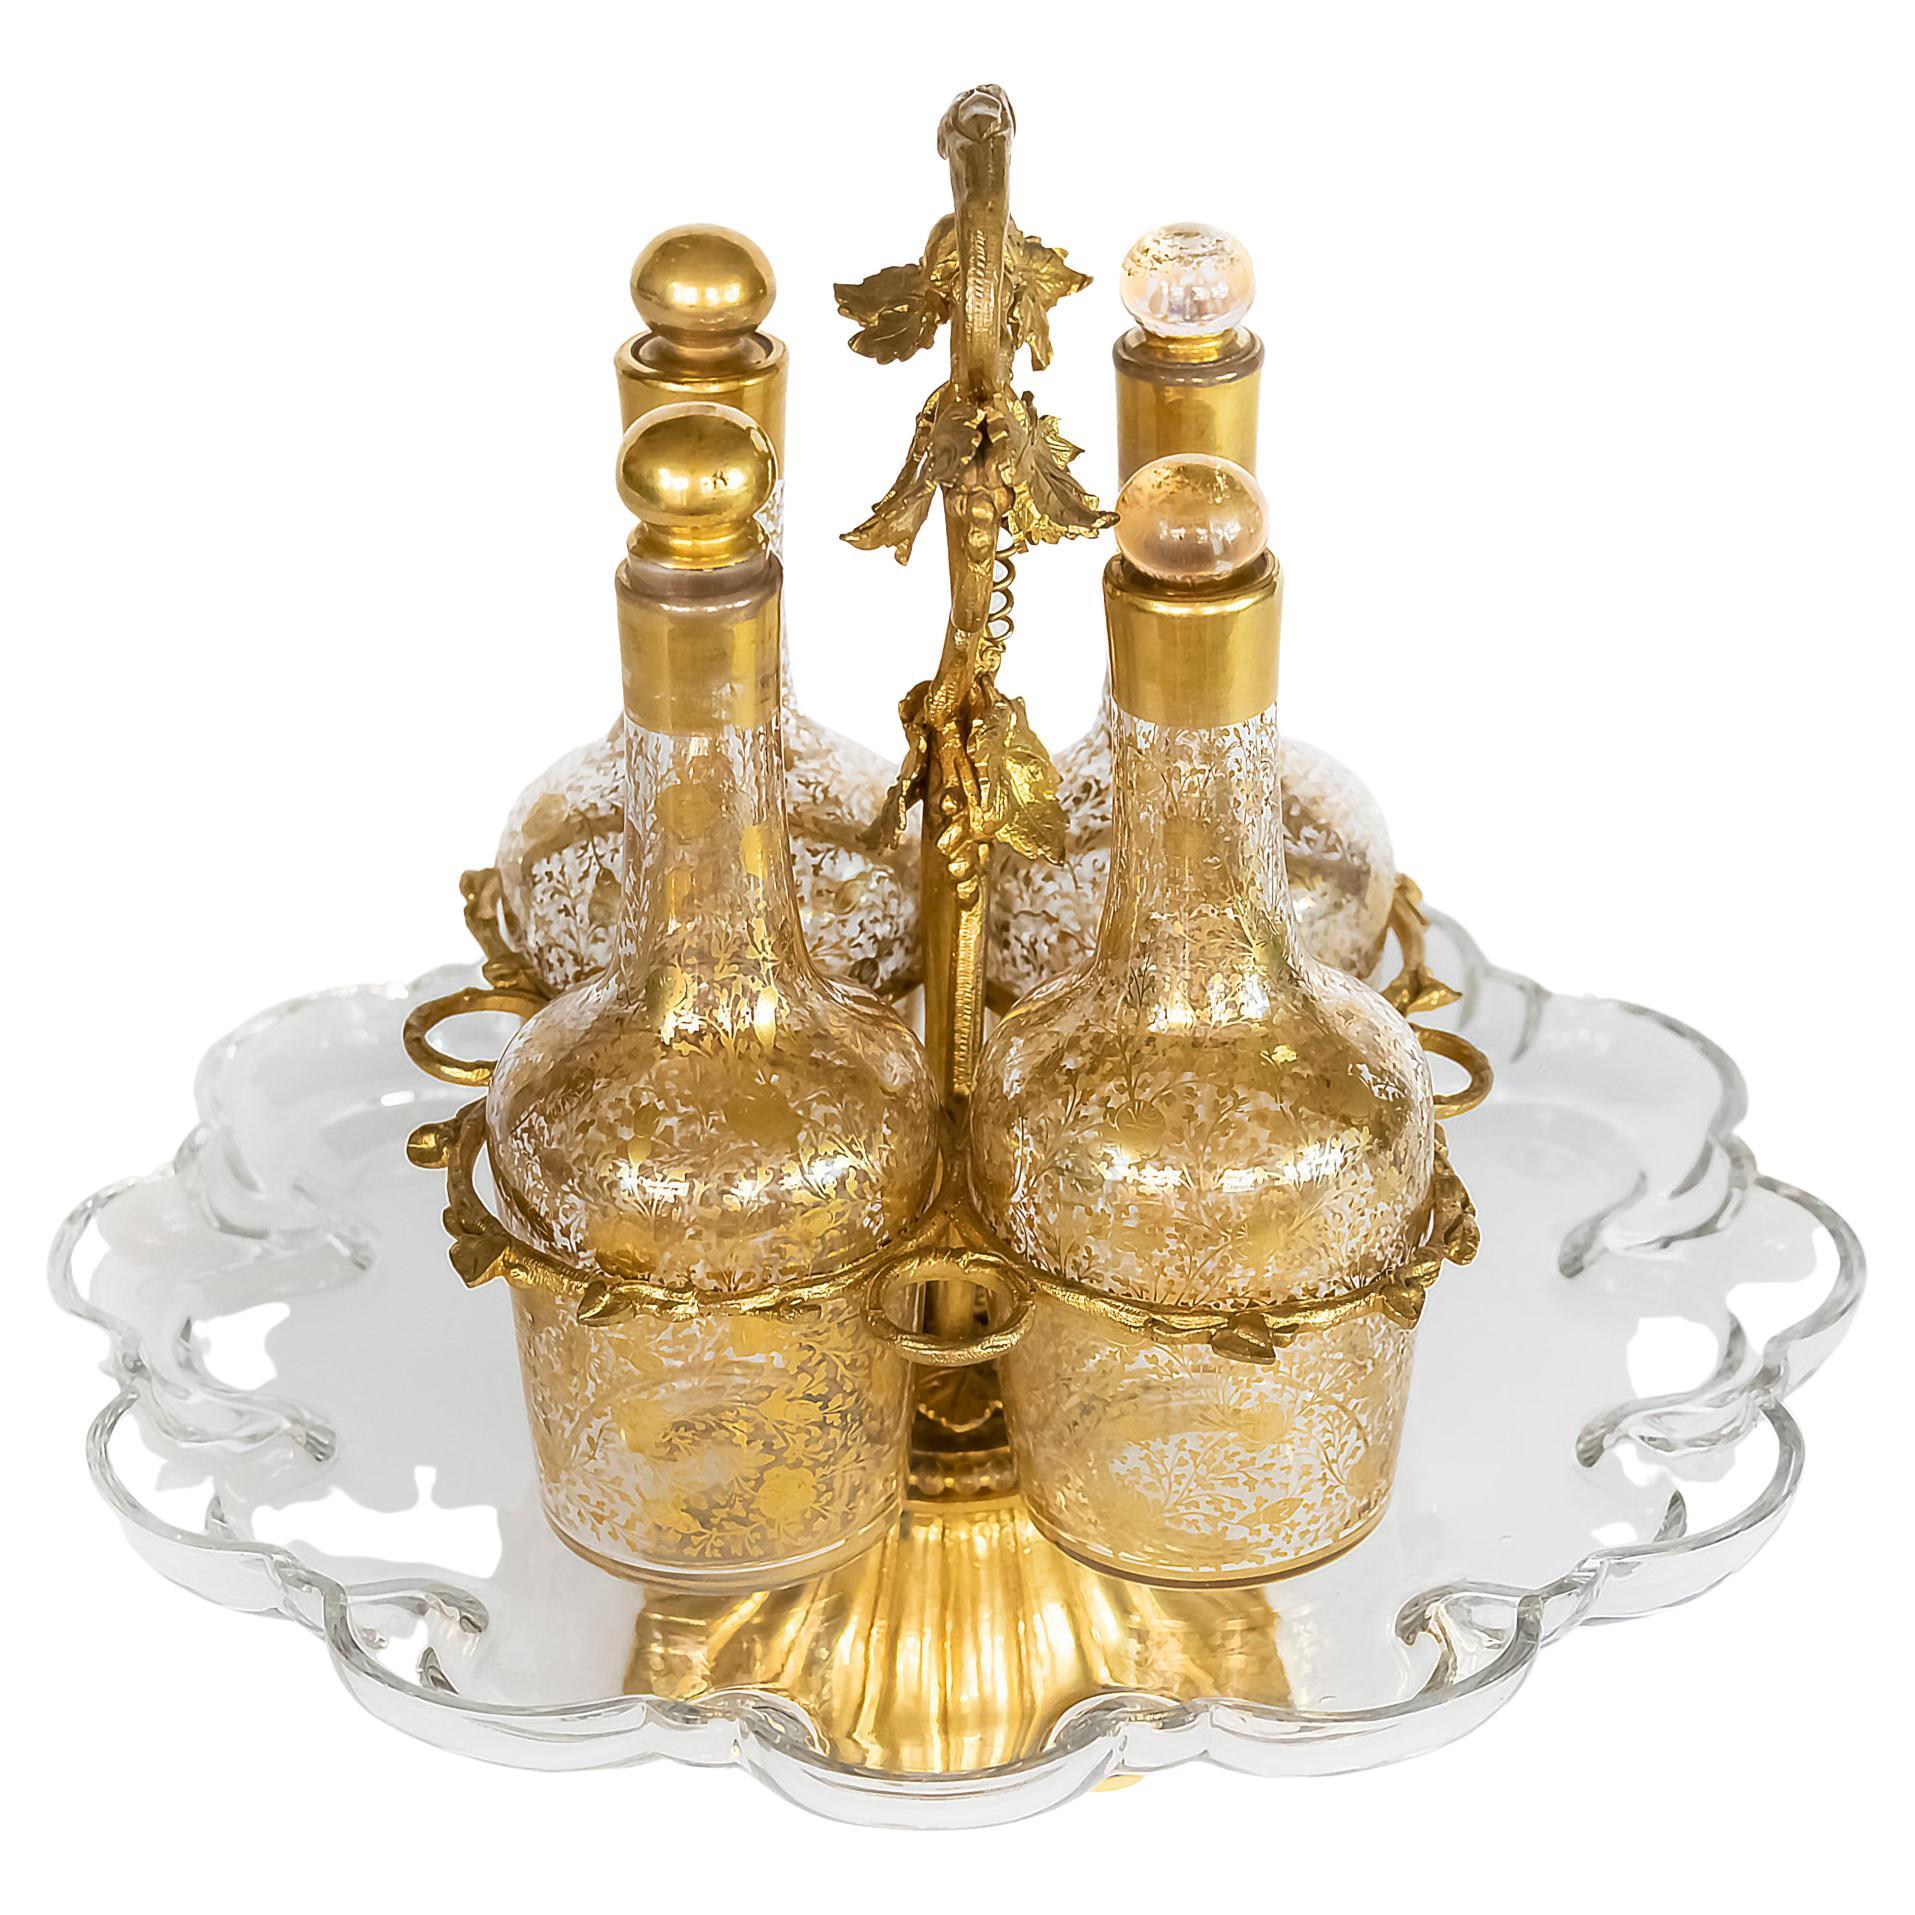 French Antique Baccarat Crystal Liqueur Decanter/Carafe Carousell Set